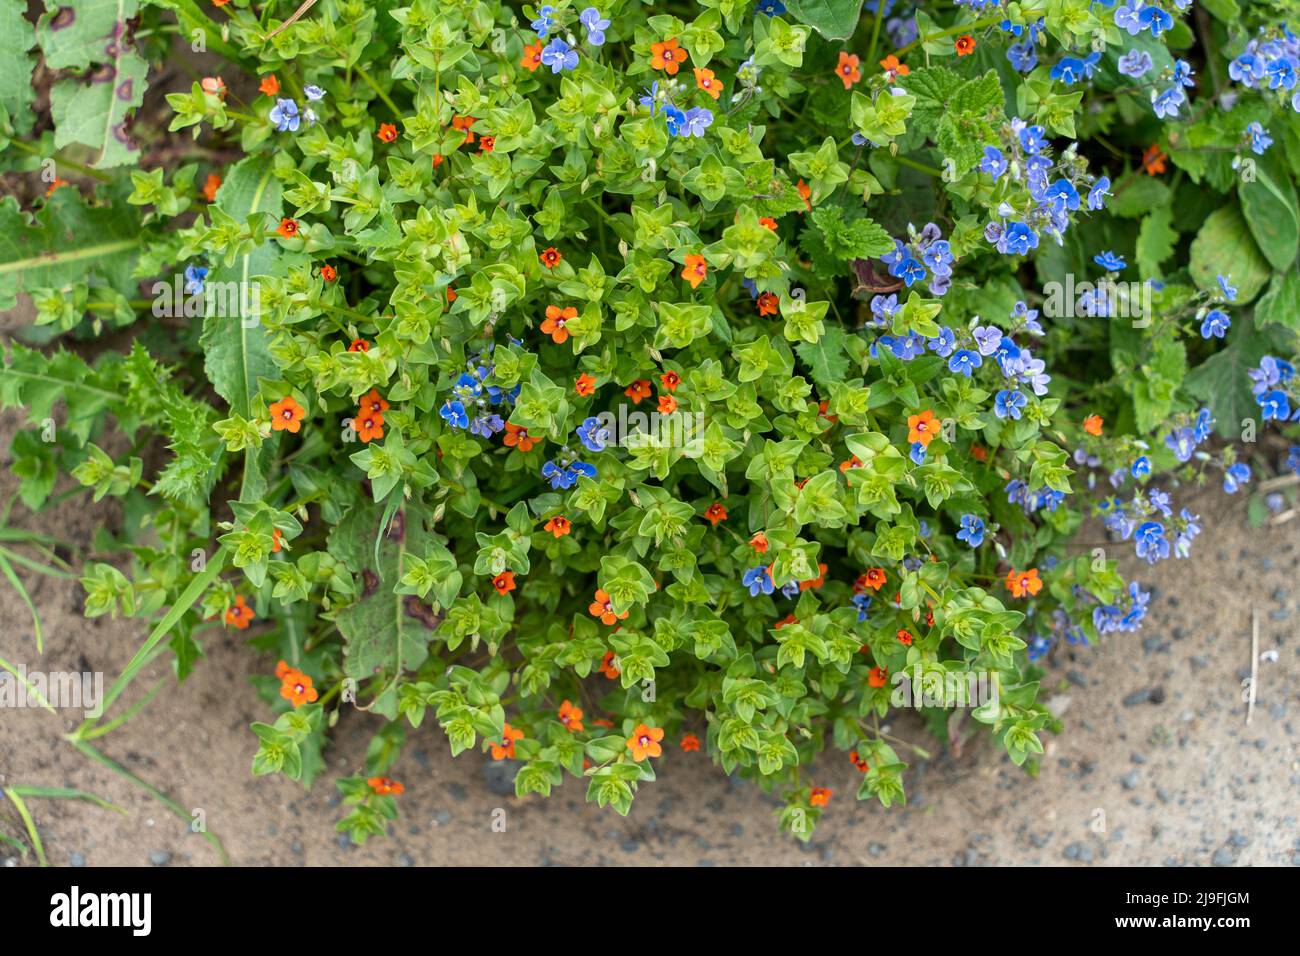 Scarlet pimpernel - Anagallis arvensis and Germander speedwell - Veronica chamaedrys growing together at the side of a path. Stock Photo